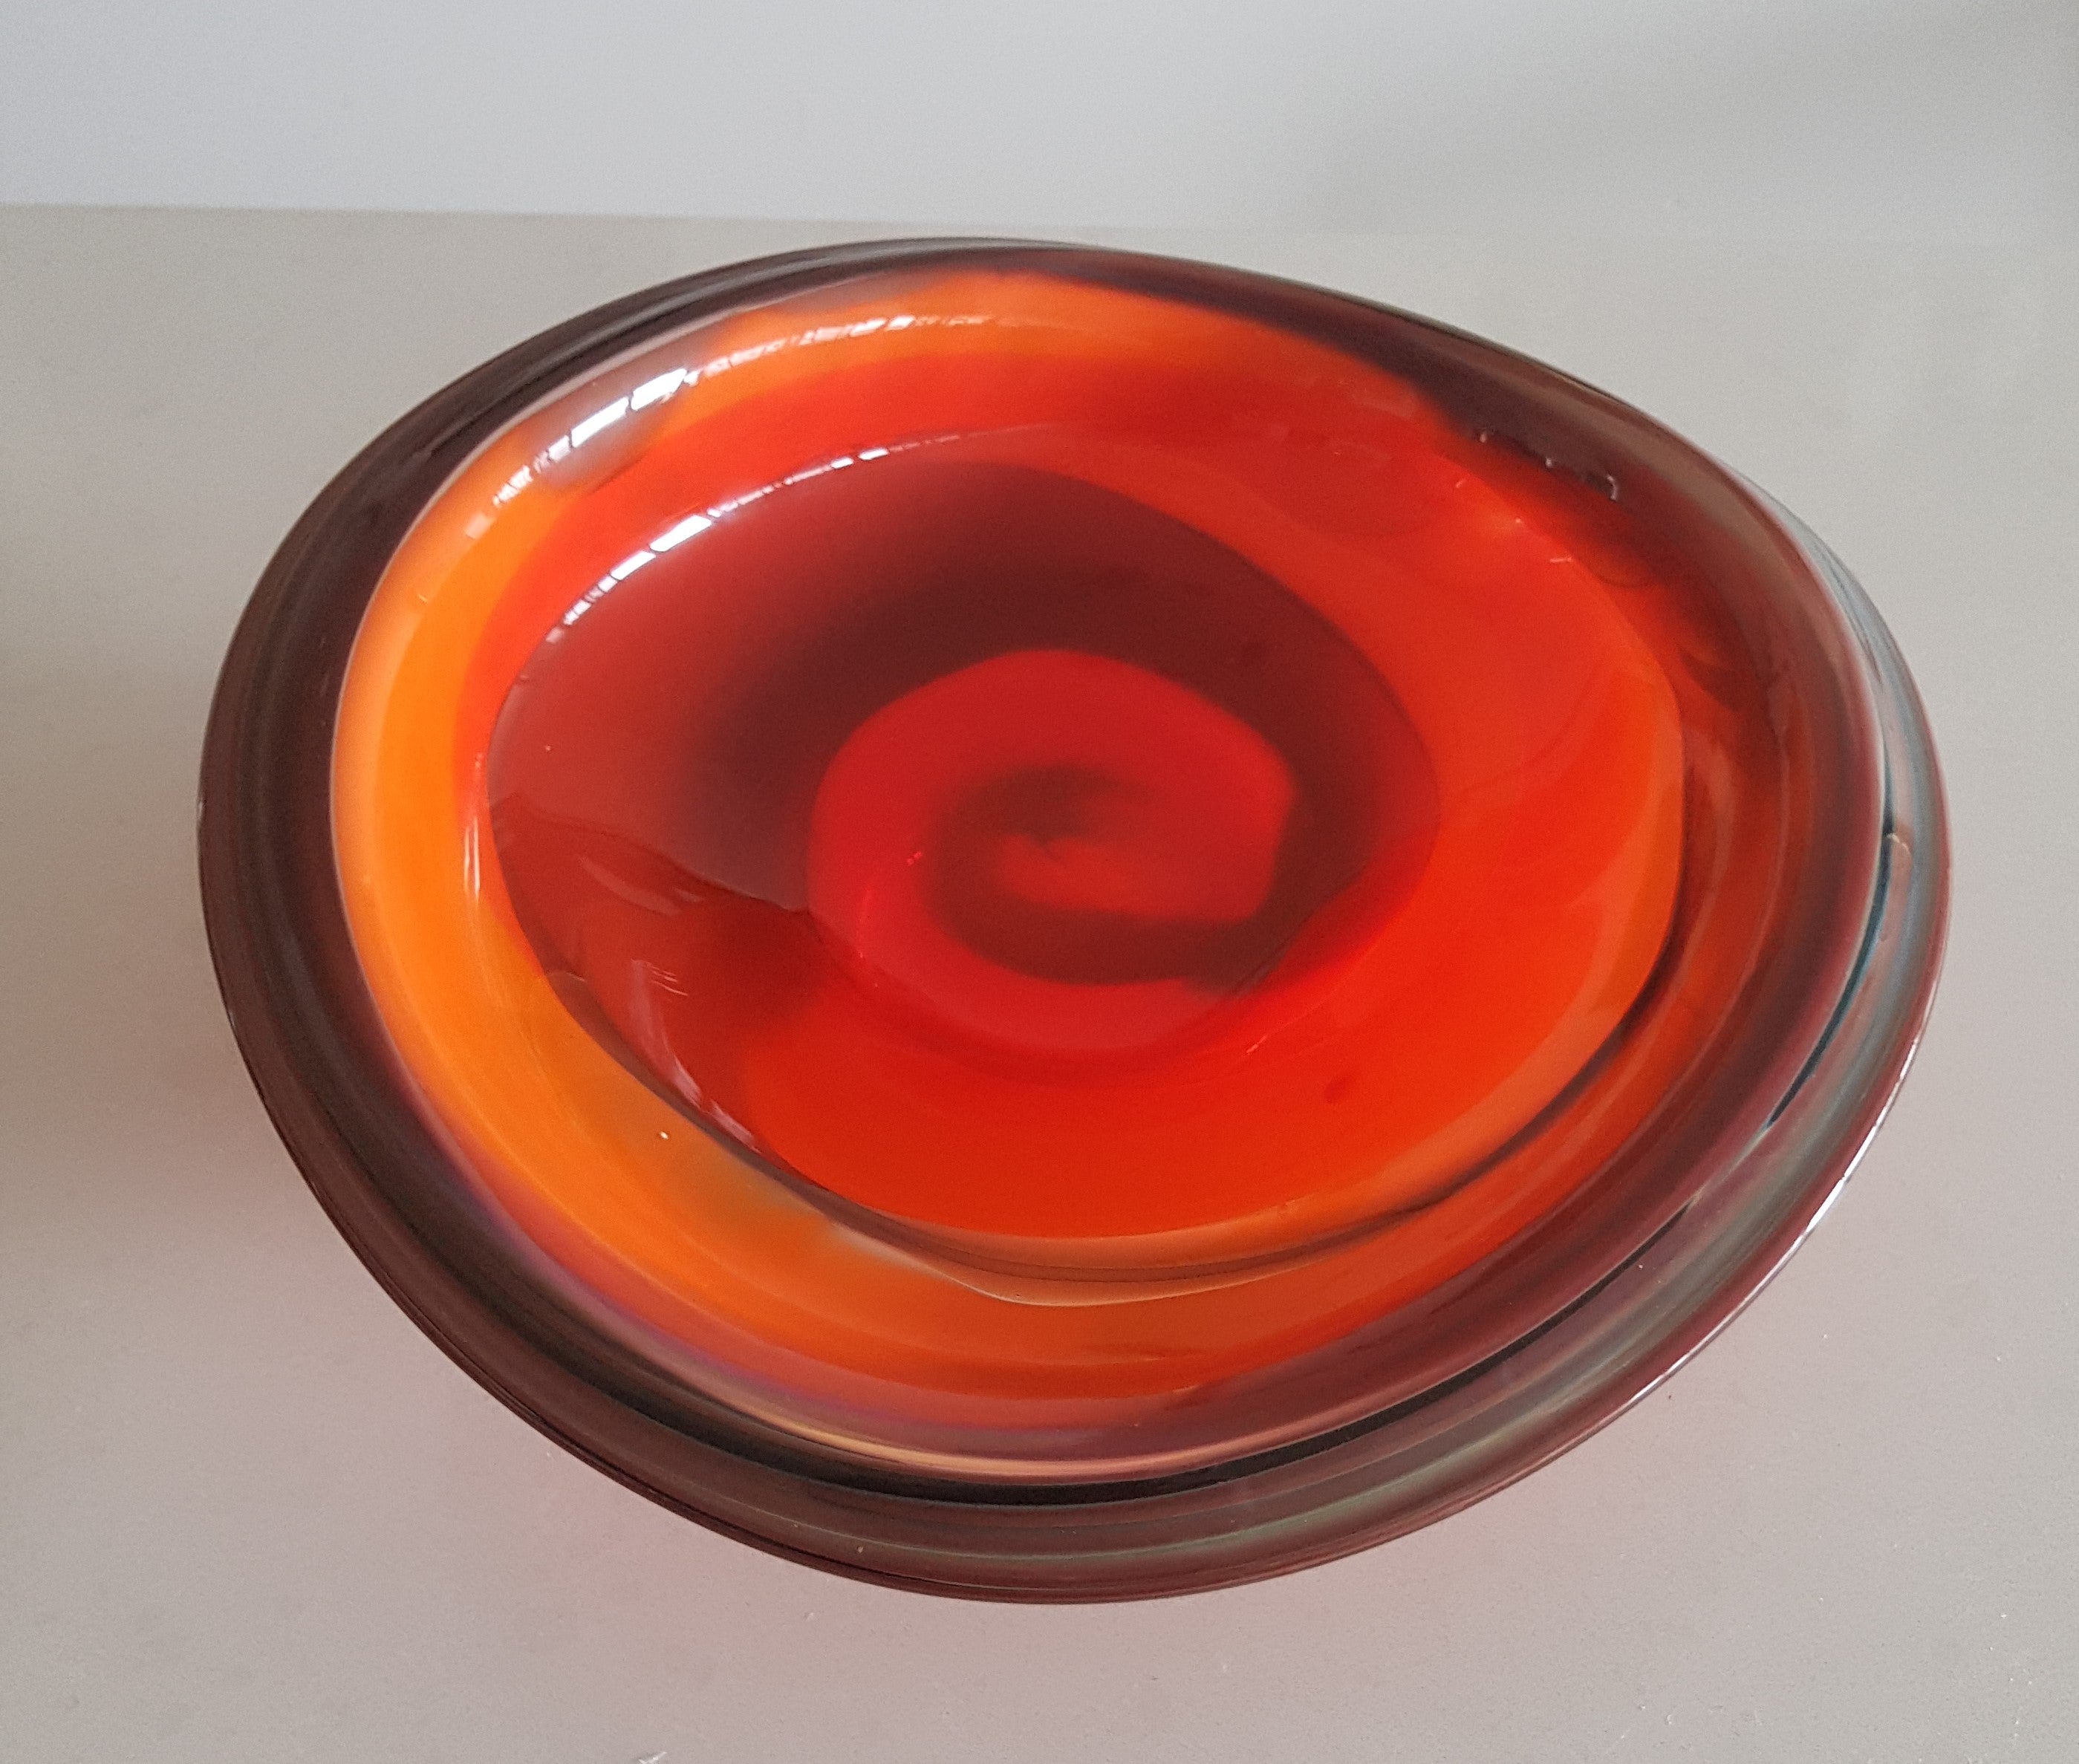 files/JM1113_Footed_Bowl_Red_Large_495_37_x_13cm_Hand_Blown_Glass.jpg